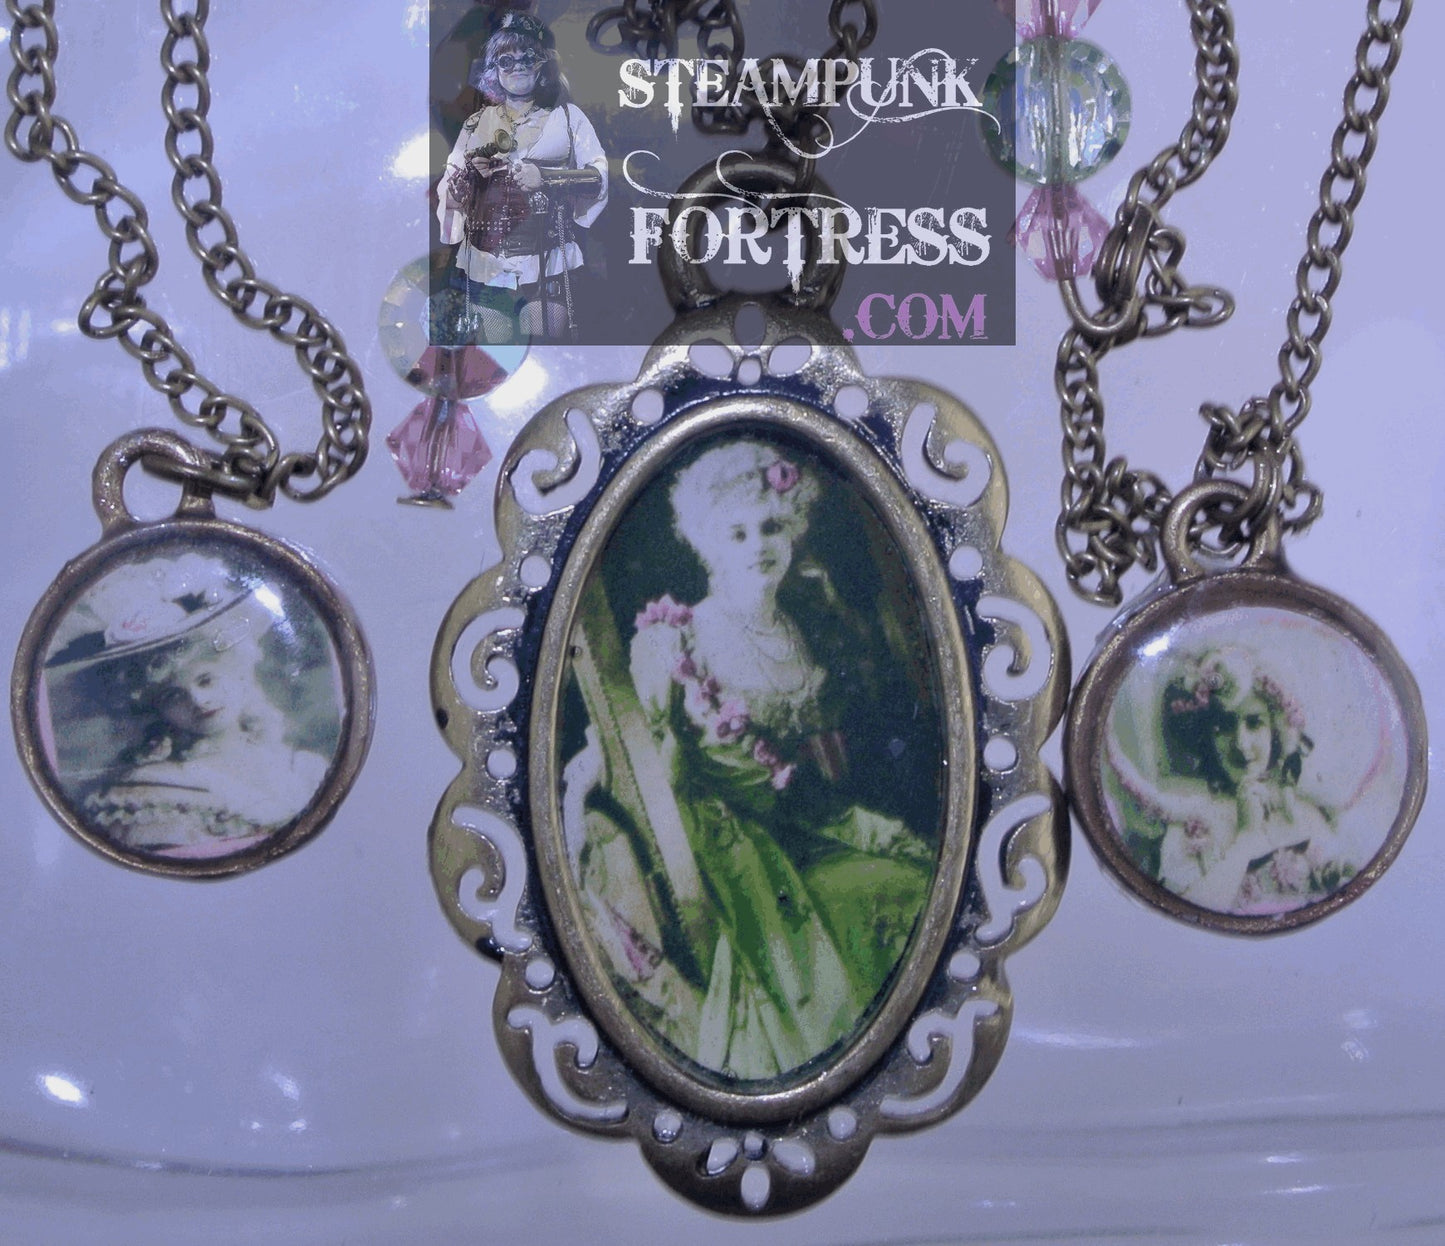 BRASS VINTAGE LADIES ARLETTE DORGERE WHITE WIG CARRIAGE PINK GREEN SWAROVSKI CRYSTALS 2 ROUNDS FANCY NECKLACE SET AVAILABLE STARR WILDE STEAMPUNK FORTRESS